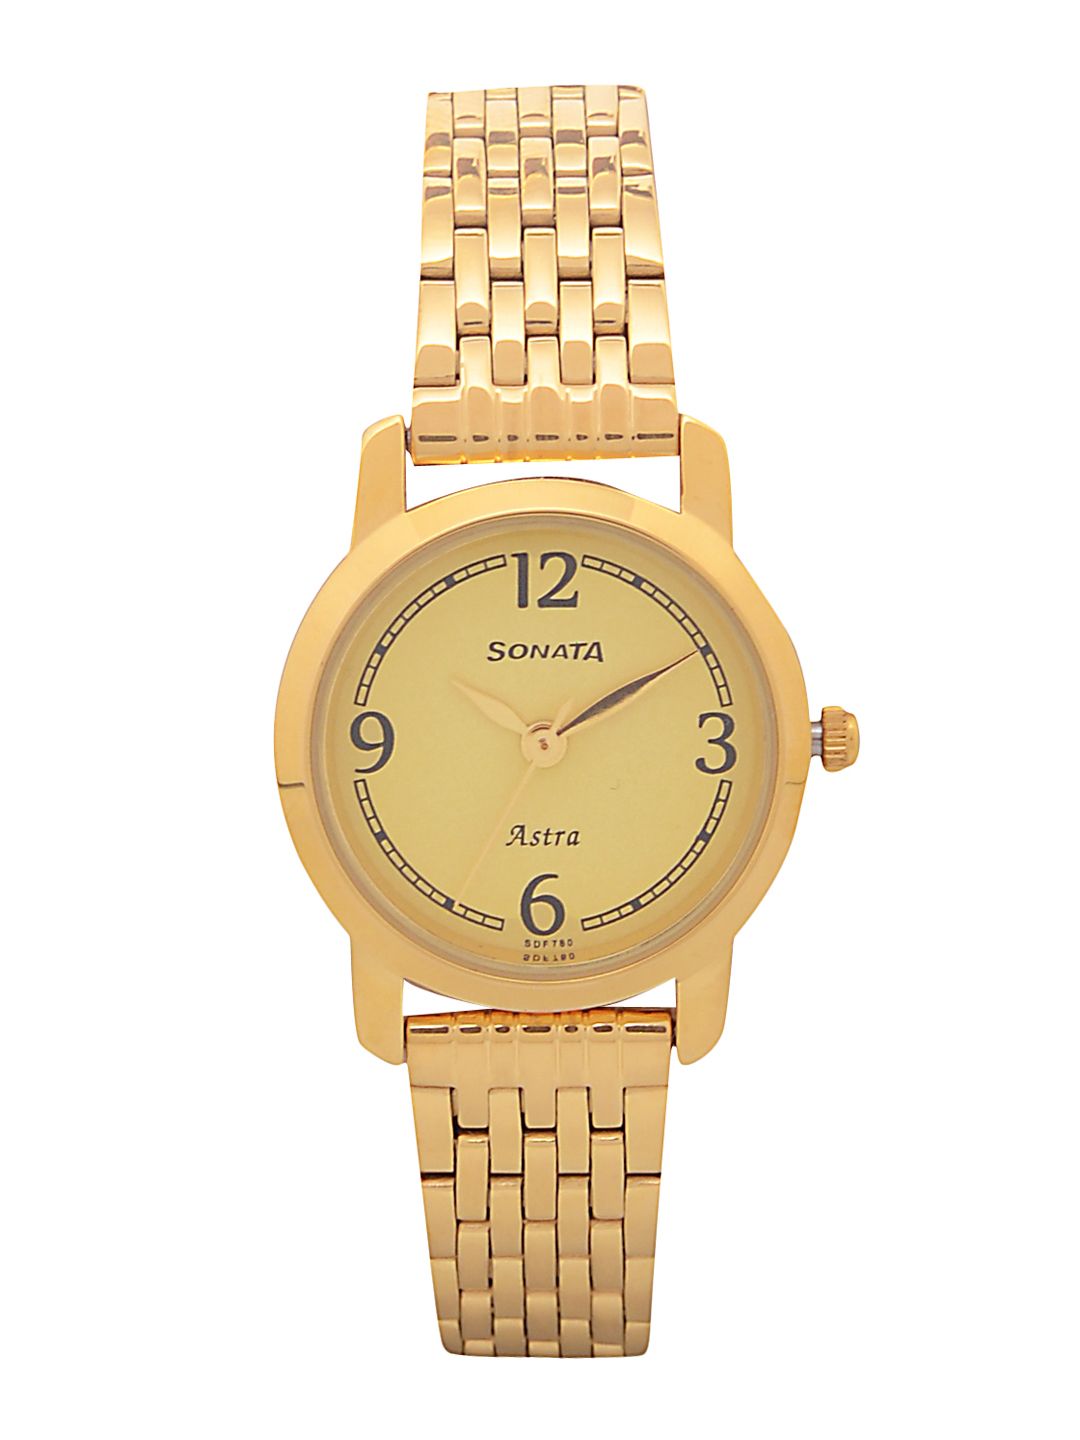 Sonata Women Gold-Toned Analogue Watch NK87018YM02 Price in India